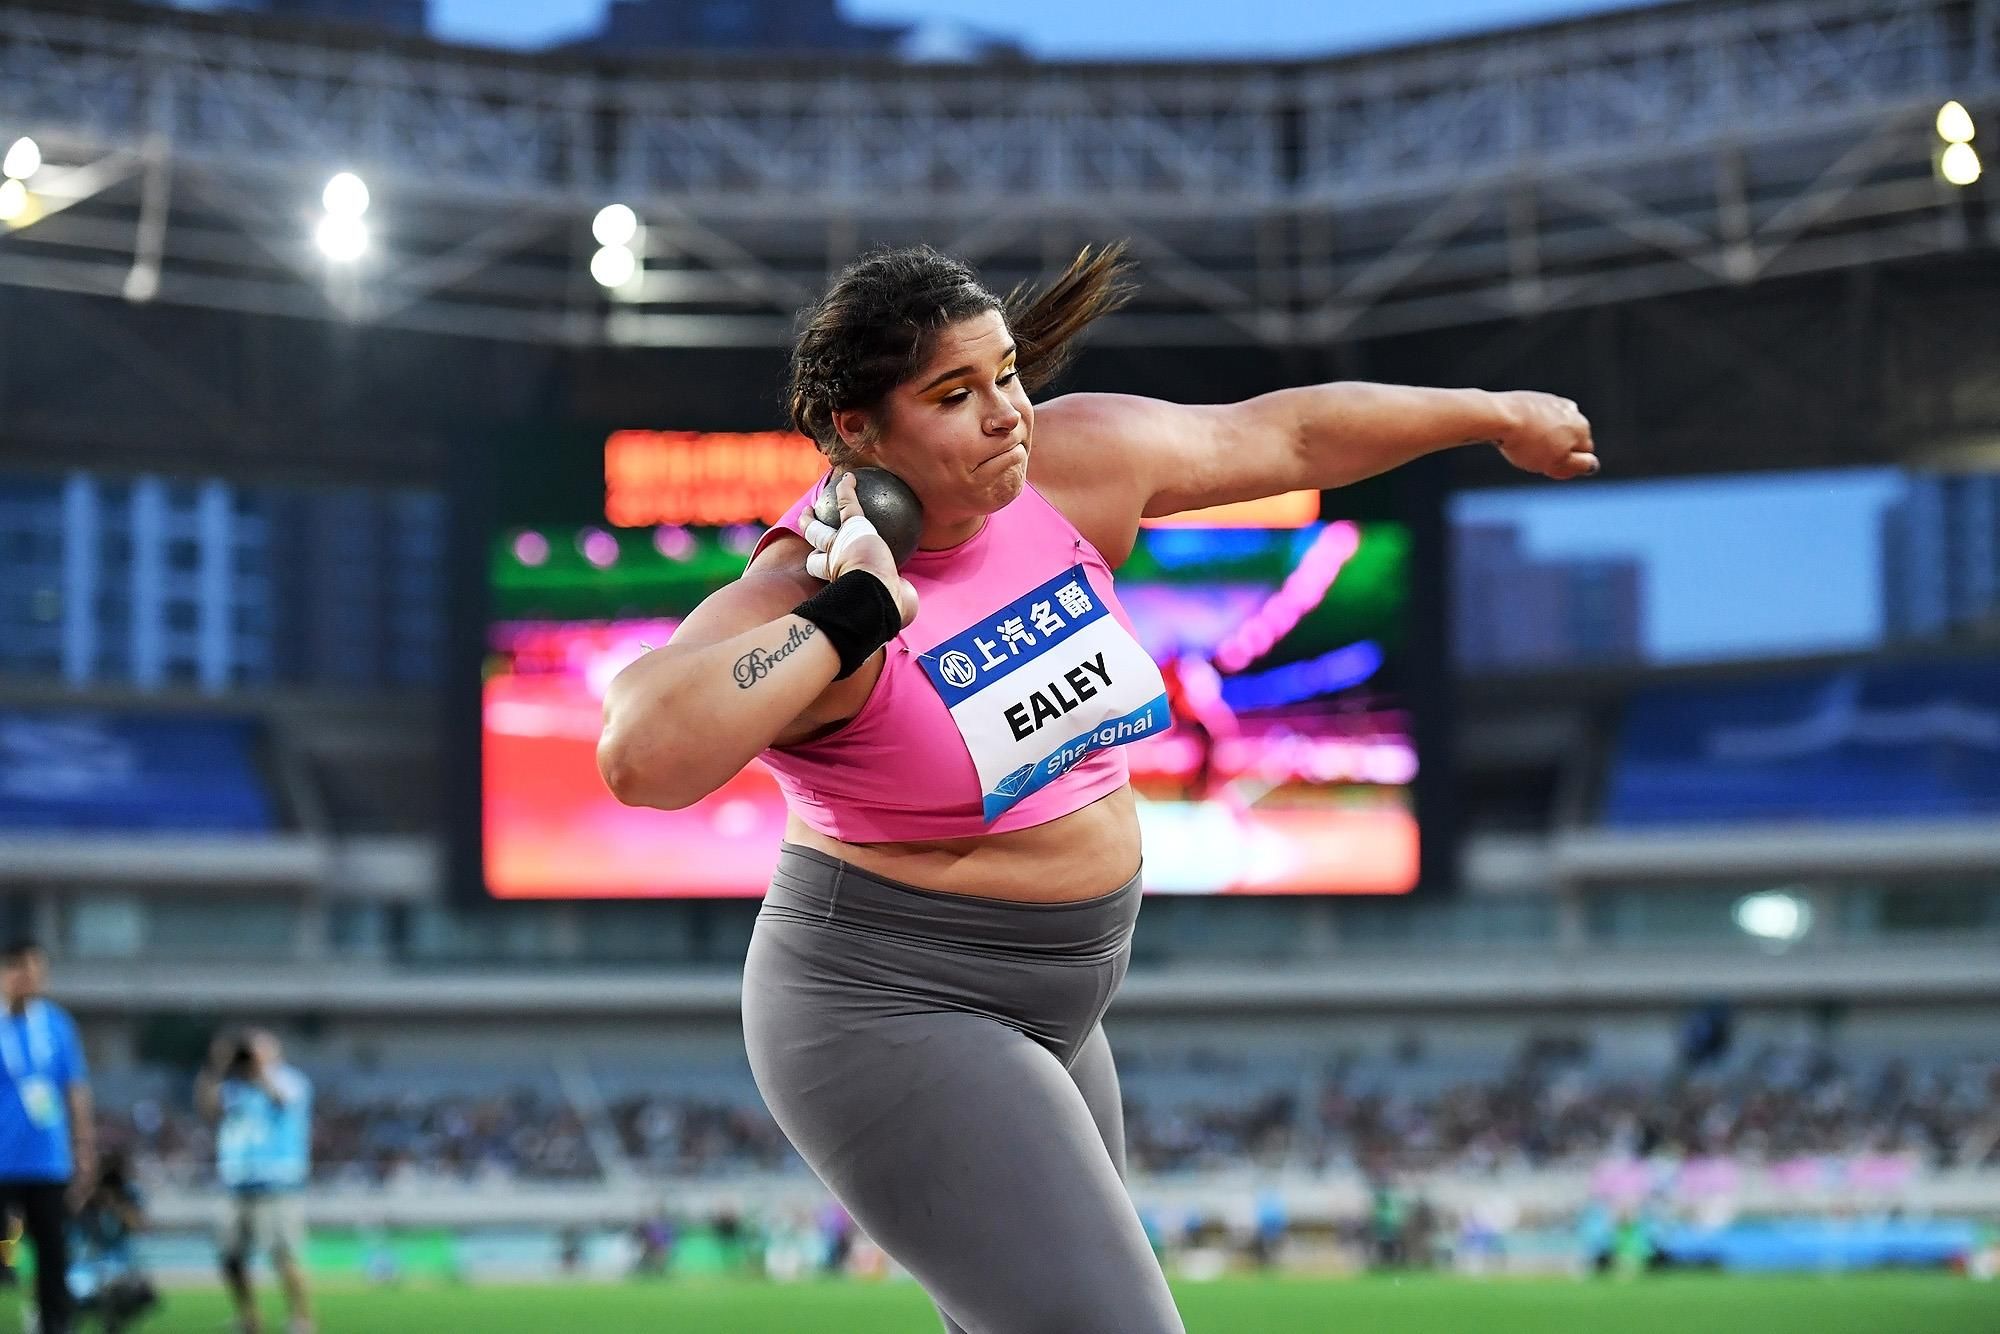 Shot put winner Chase Ealey at the Diamond League meeting in Shanghai